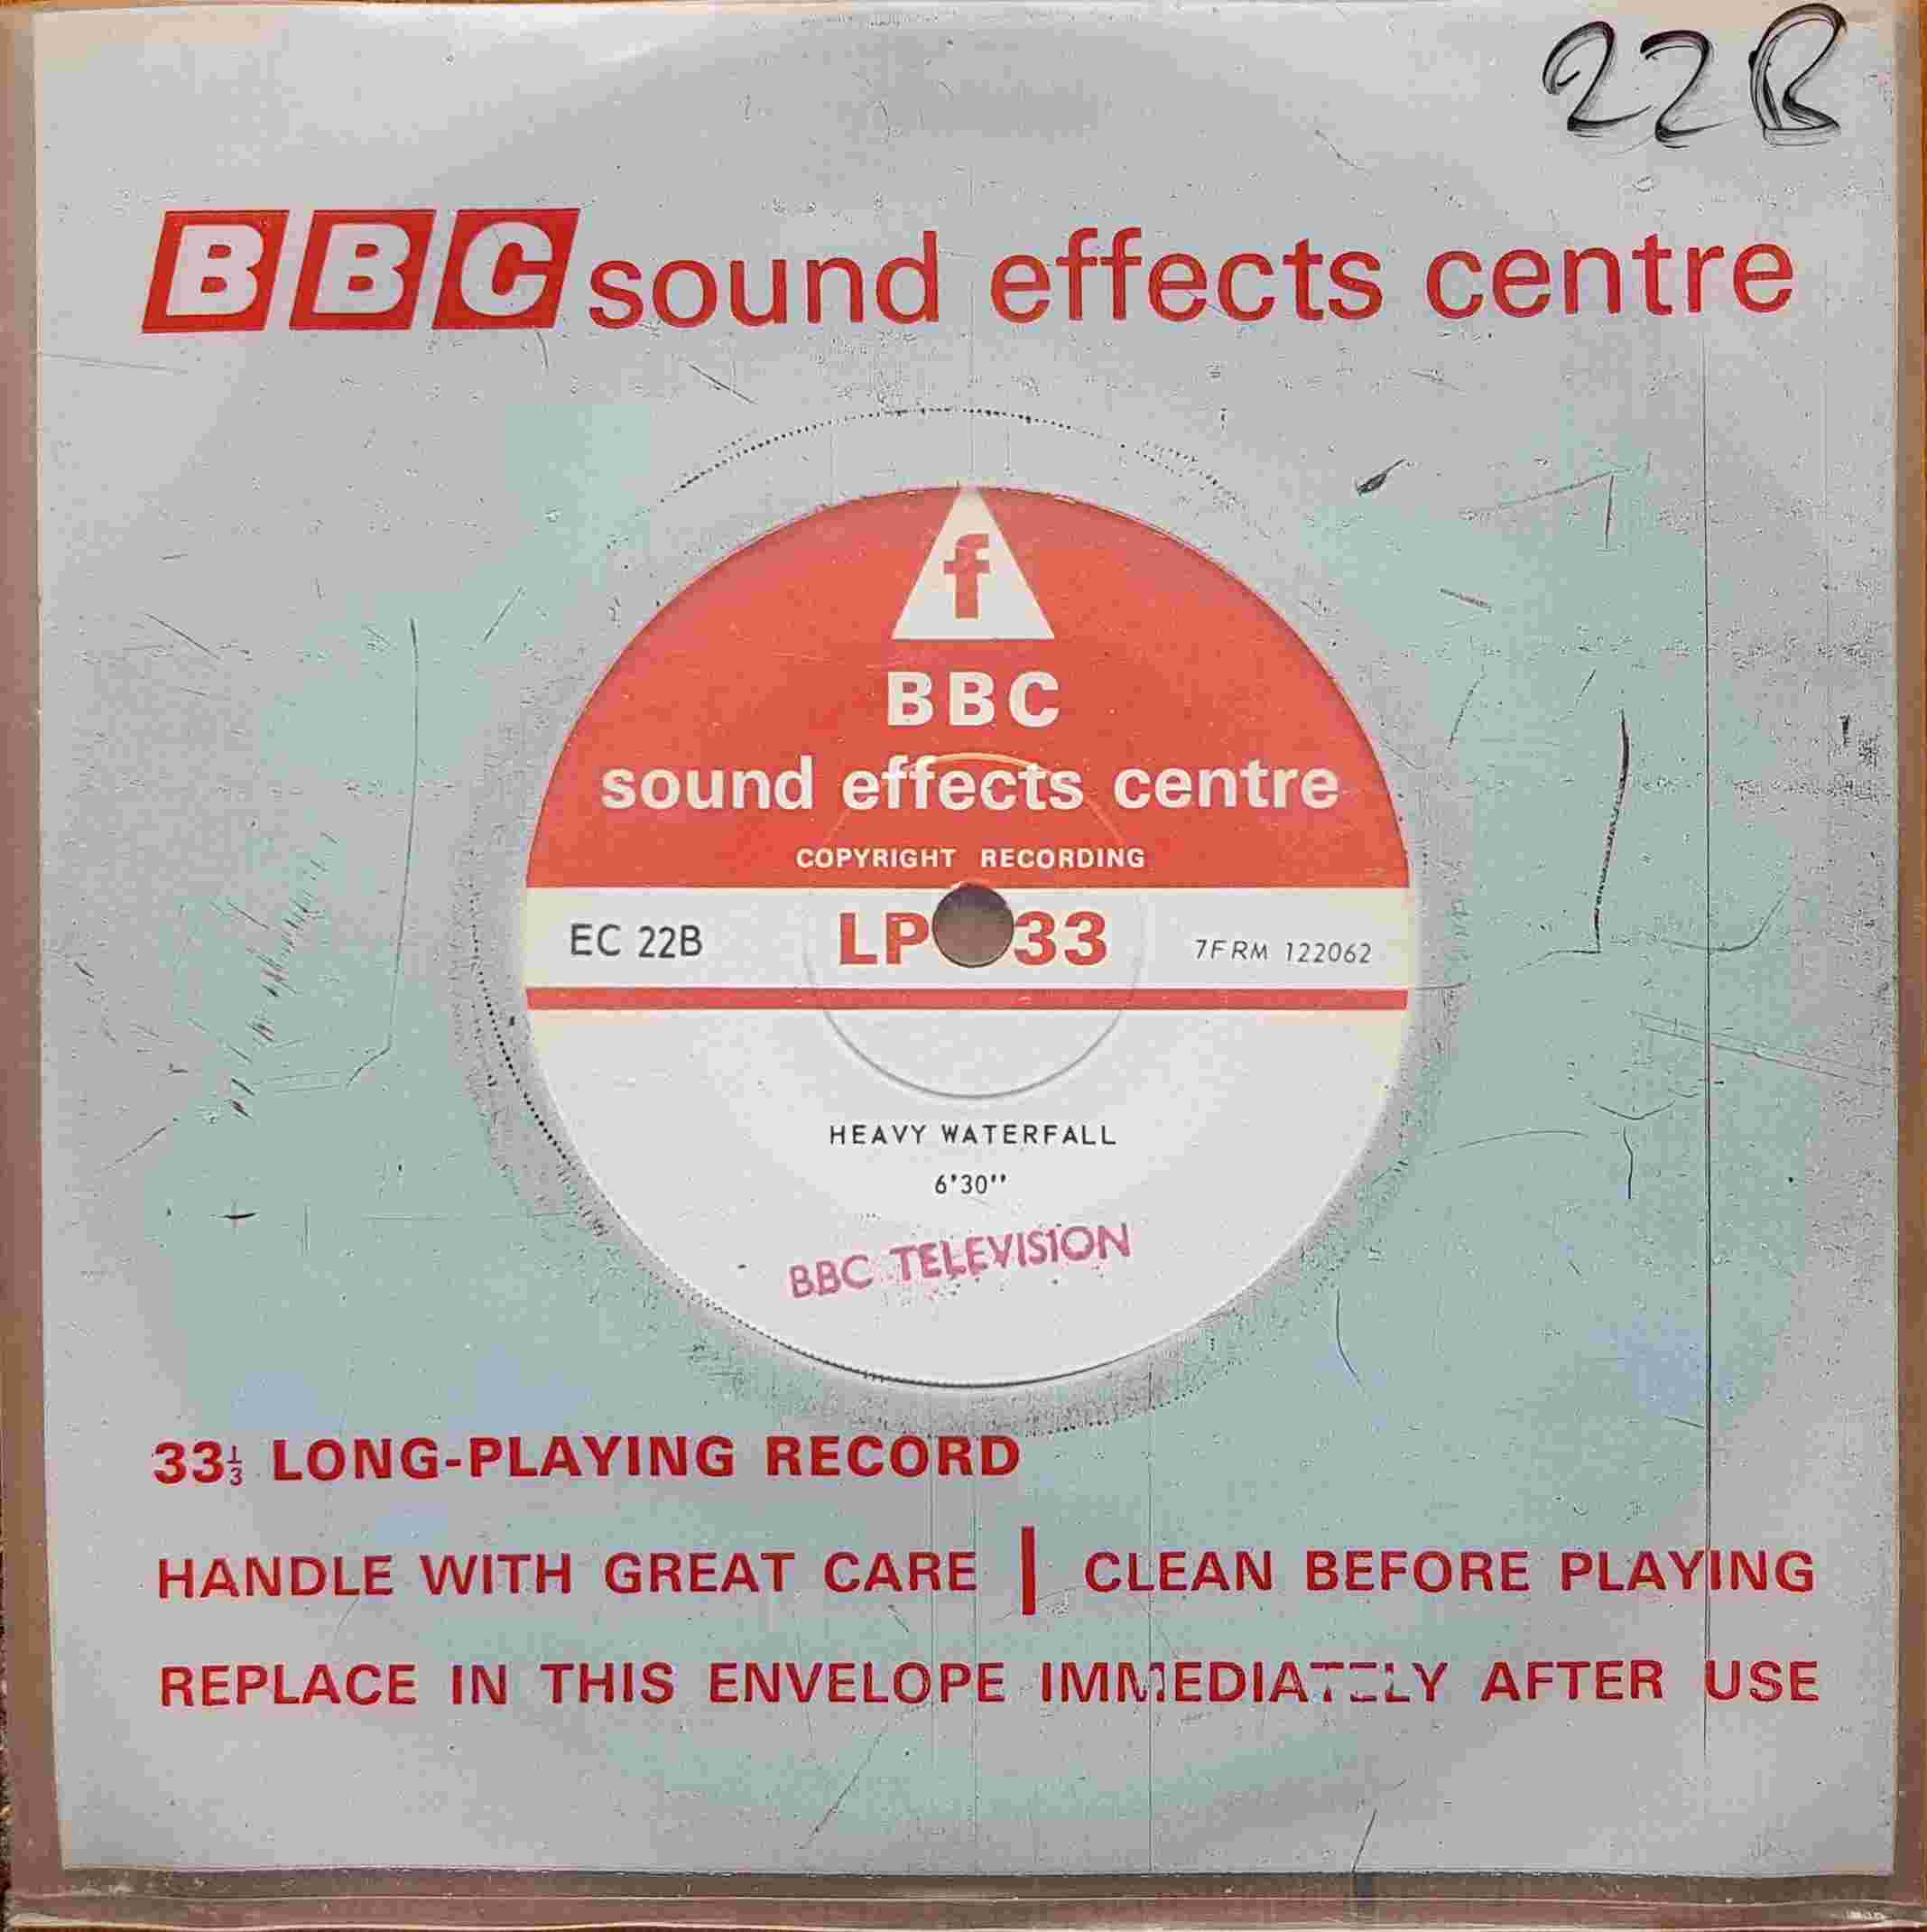 Picture of EC 22B Waterfall by artist Not registered from the BBC records and Tapes library